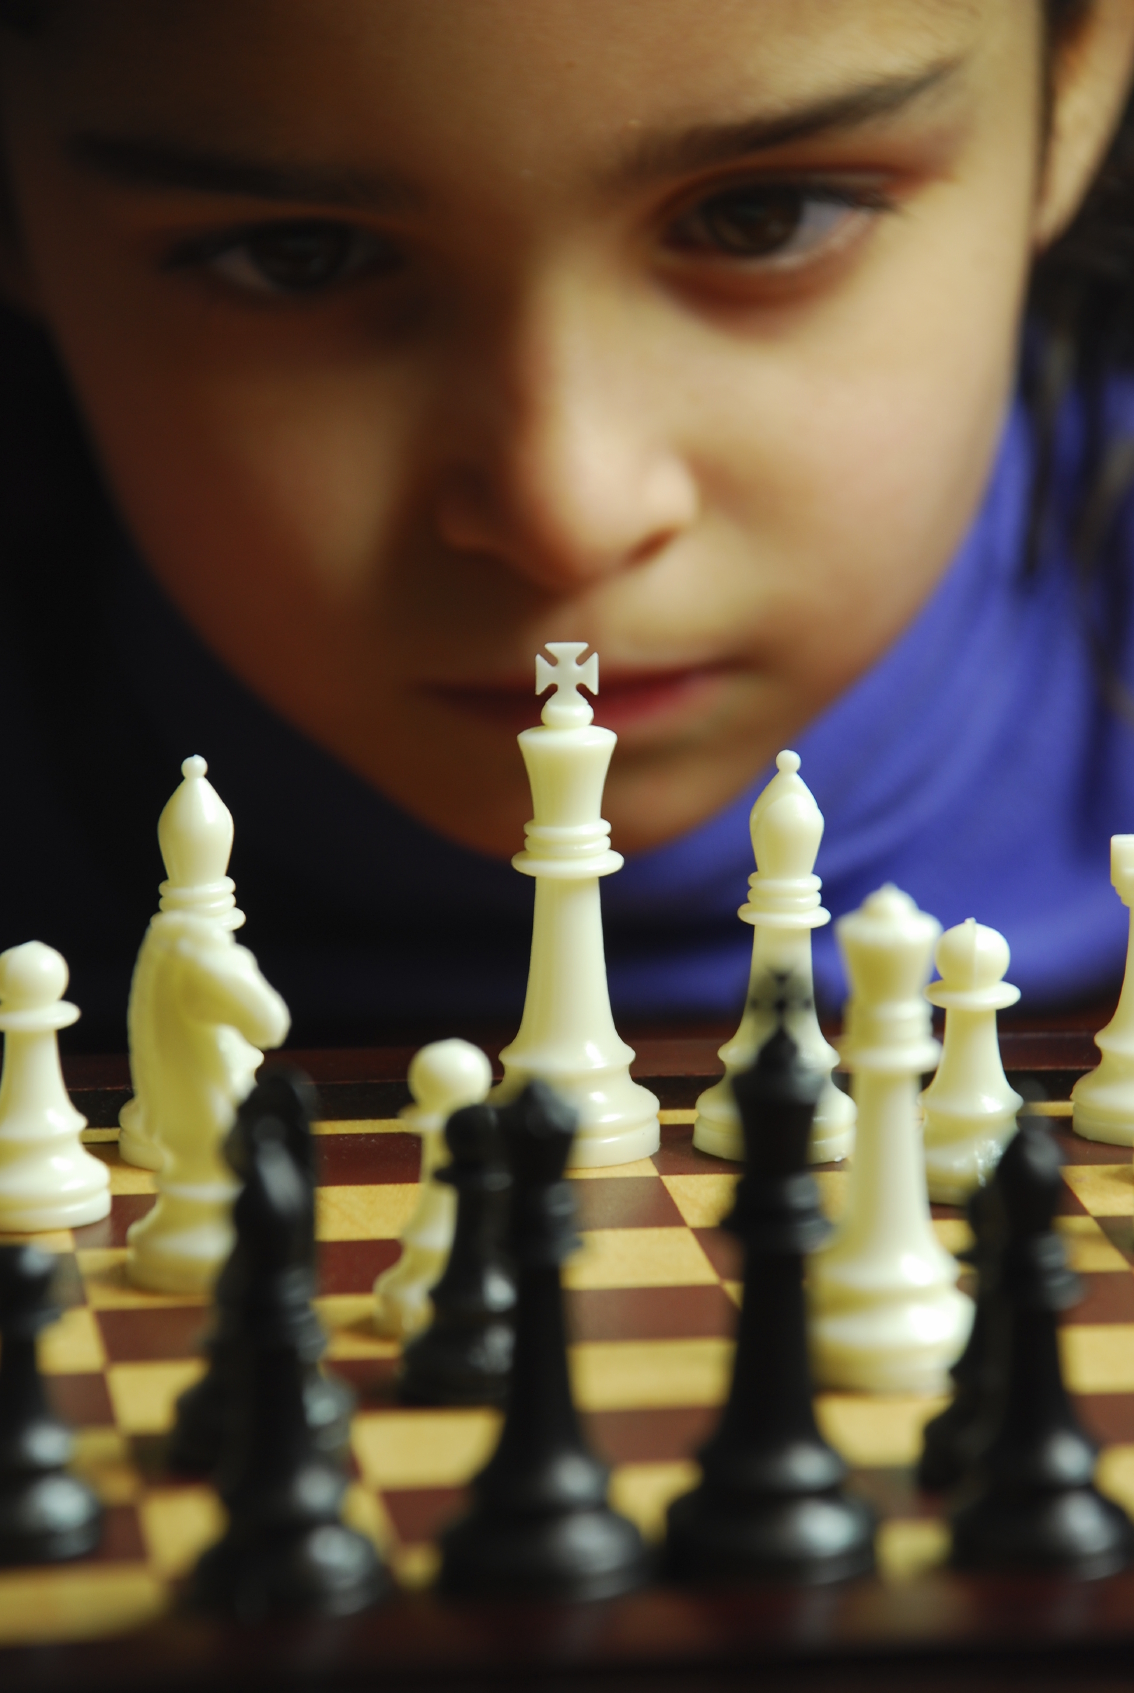 competitiveness in kids when is it too much? Boy playing chess